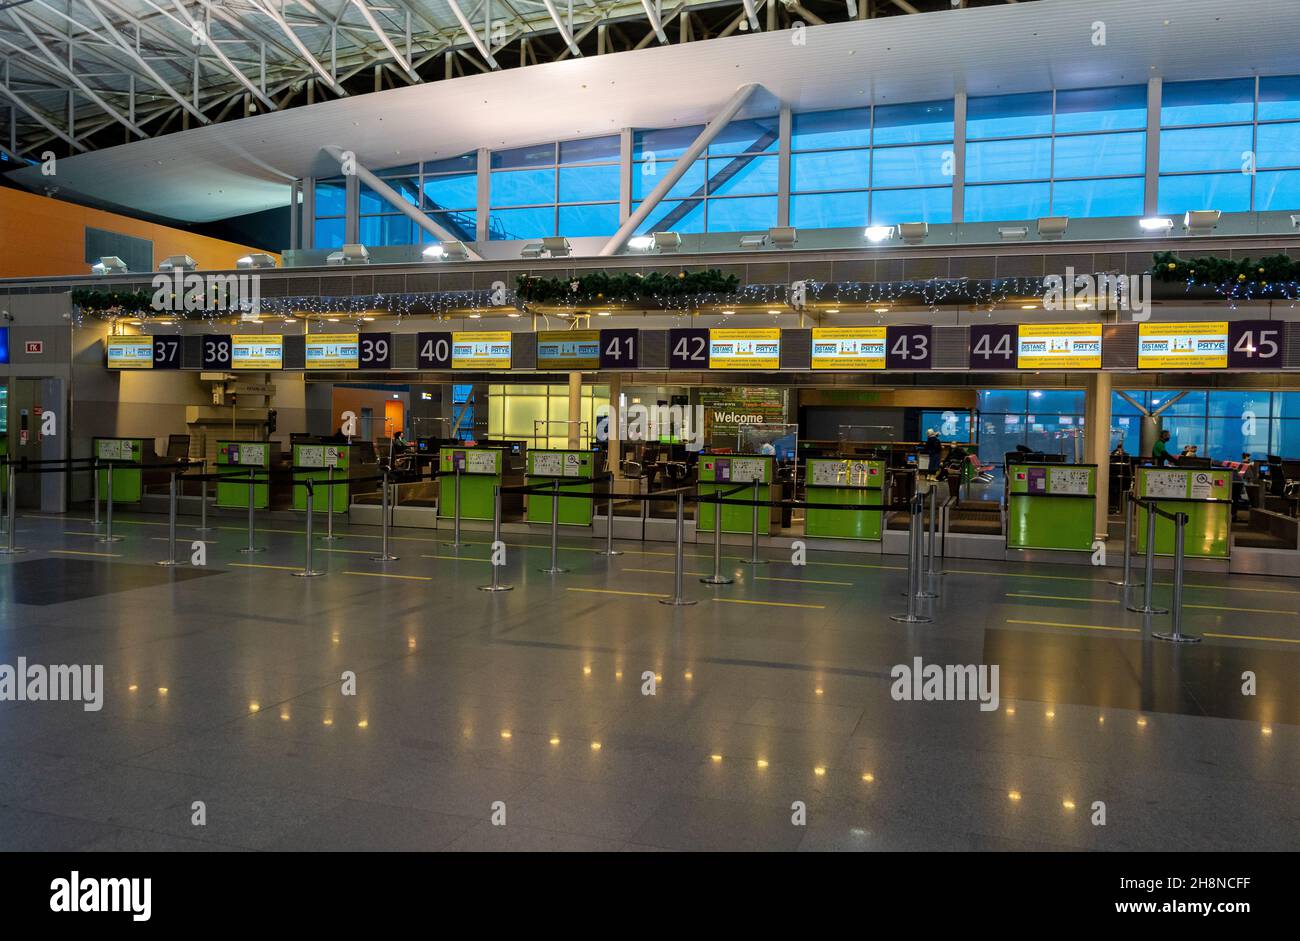 Ukraine, Kyiv - December 29, 2020: Empty check-in counter for a flight to the airport. Christmas. New Year decorations at the Boryspil airport. Garlands and lights, winter on vacation. Stock Photo